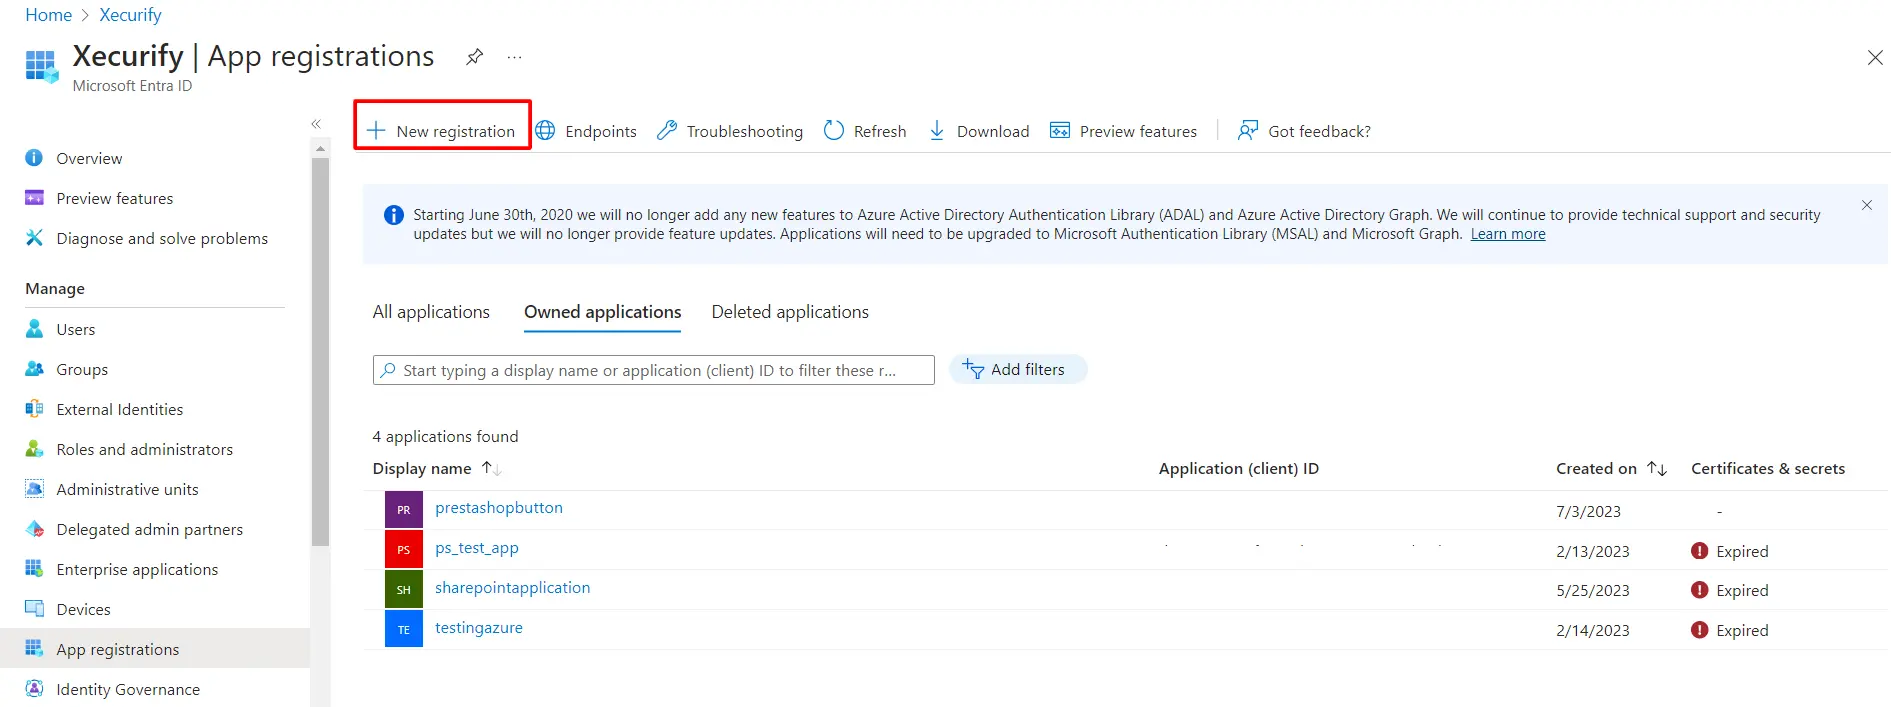 Azure AD Magento headless SSO - Azure Single Sign-On(SSO) Login in Magento - New registrations